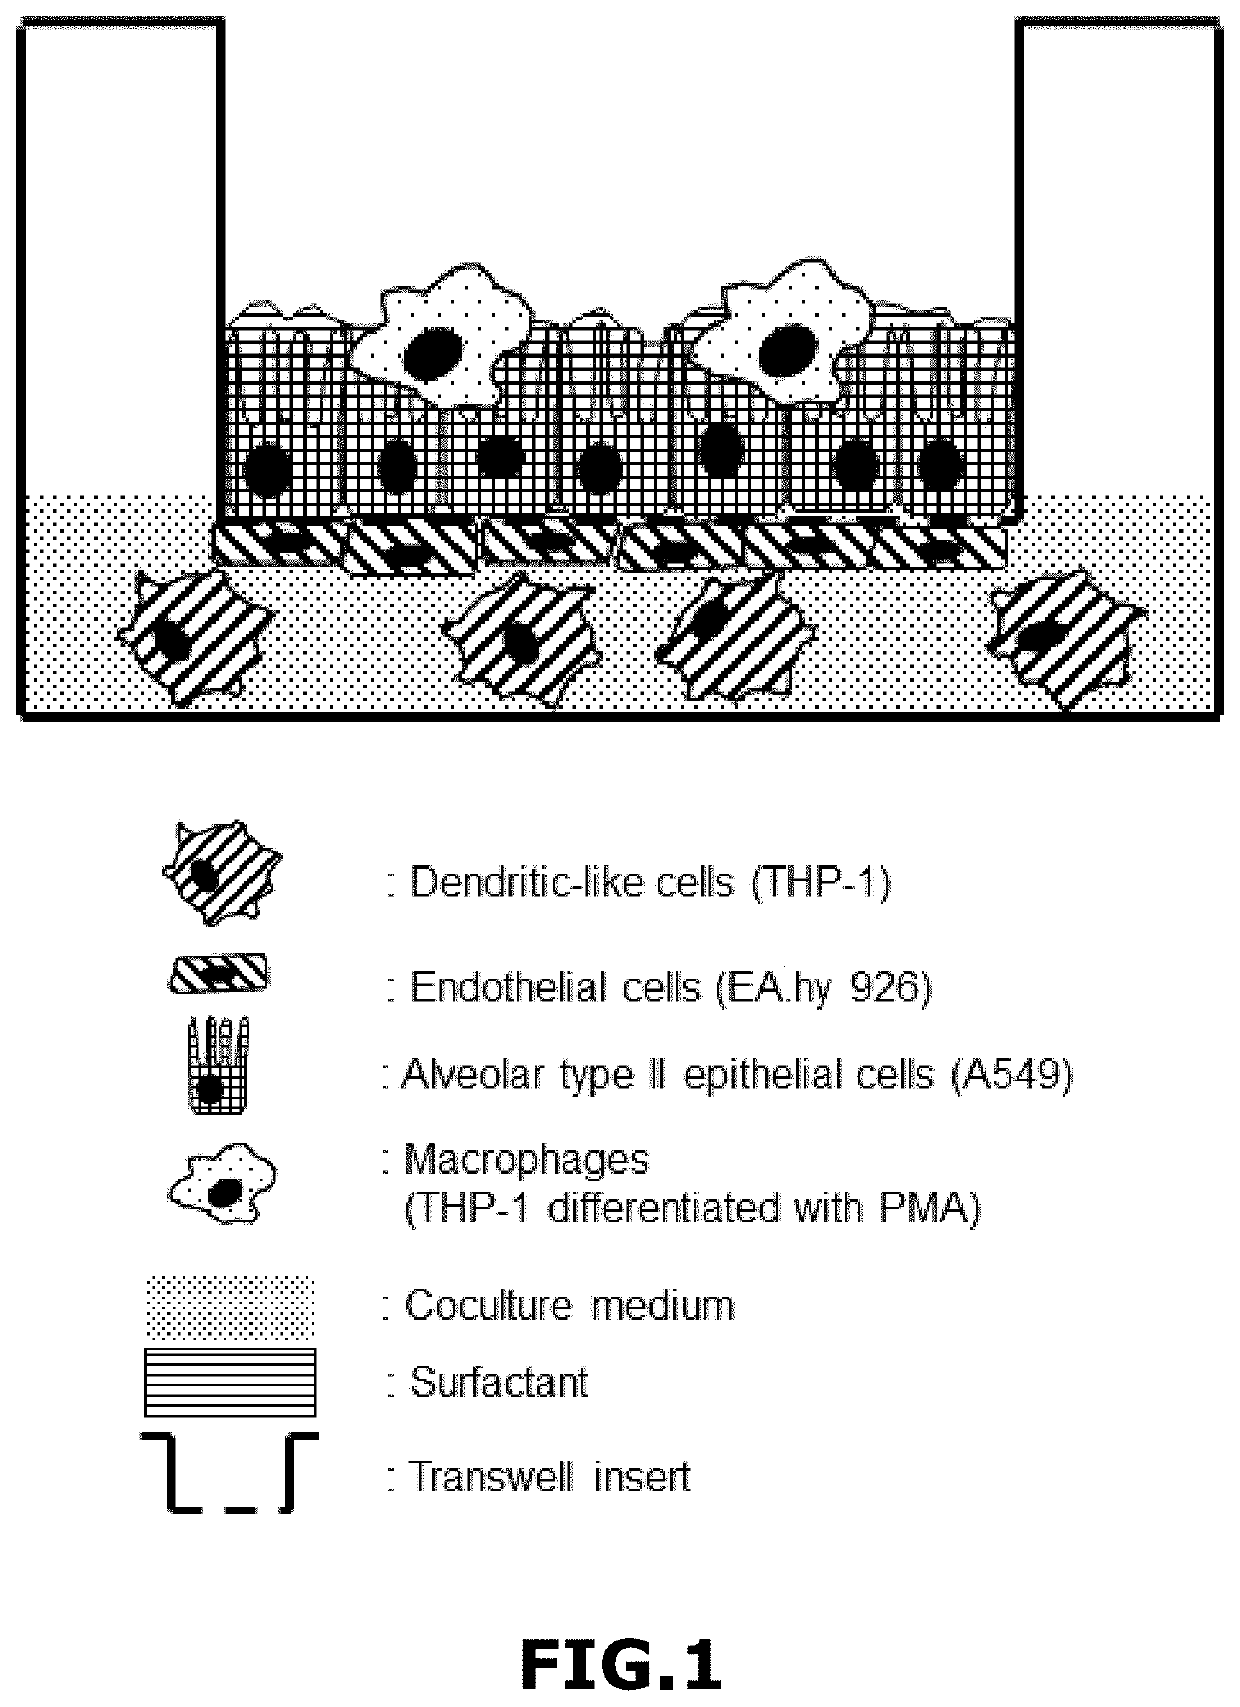 Three-dimensional in vitro lung model, process for preparing said model, and its use for determining and /or predicting the sensitizing effects of inhalable products